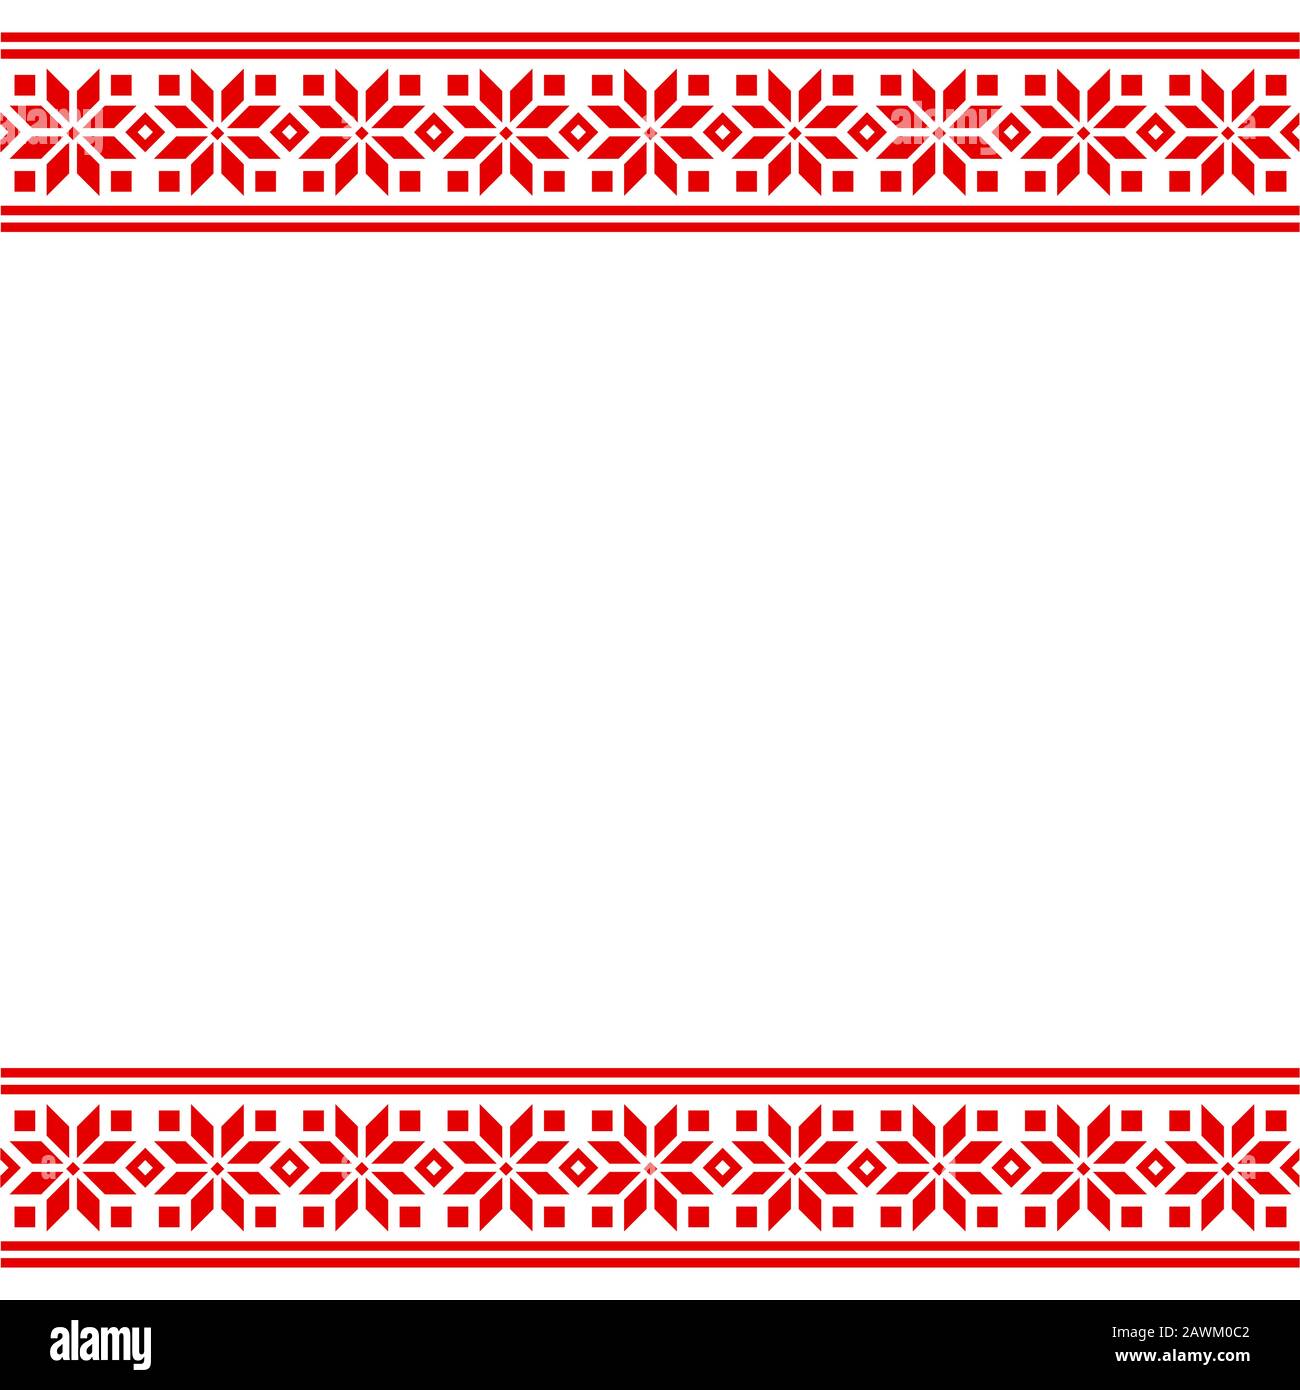 Ethnic Slavic embroidery pattern border. Traditional geometric ornament template, red and white vector design. Stock Vector